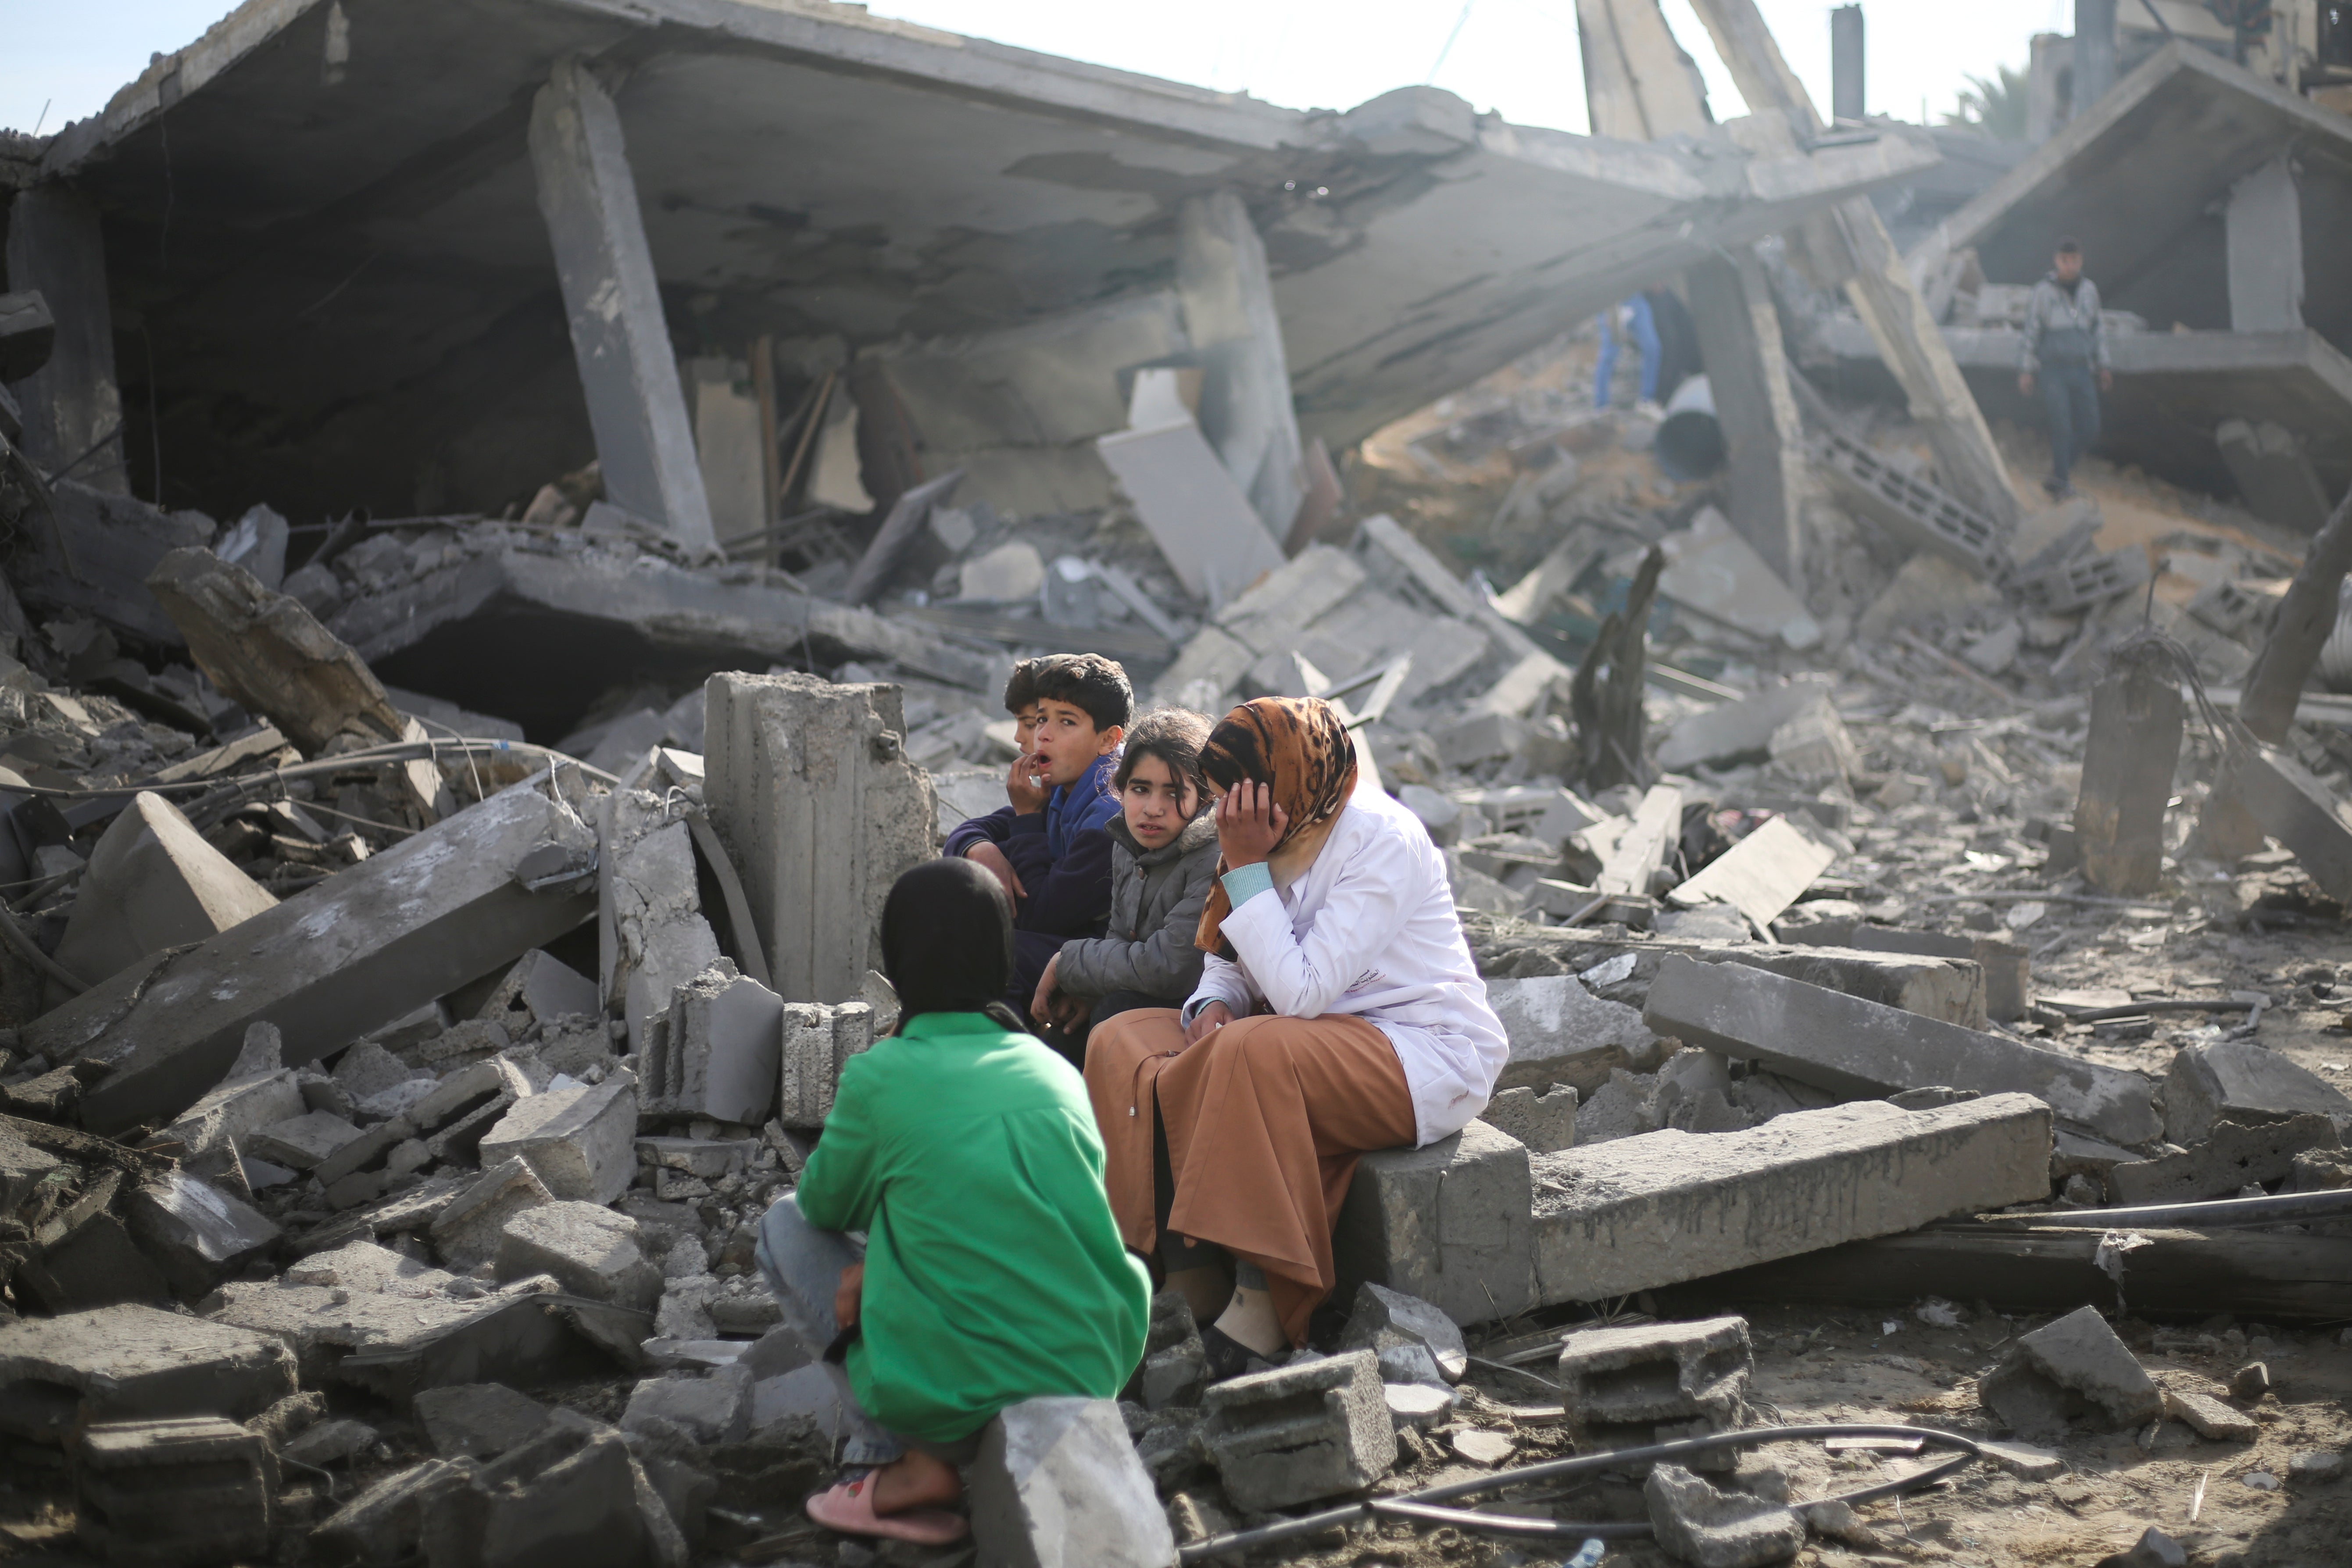 Palestinians sit by the destruction from the Israeli bombardment of the Gaza Strip in Rafah